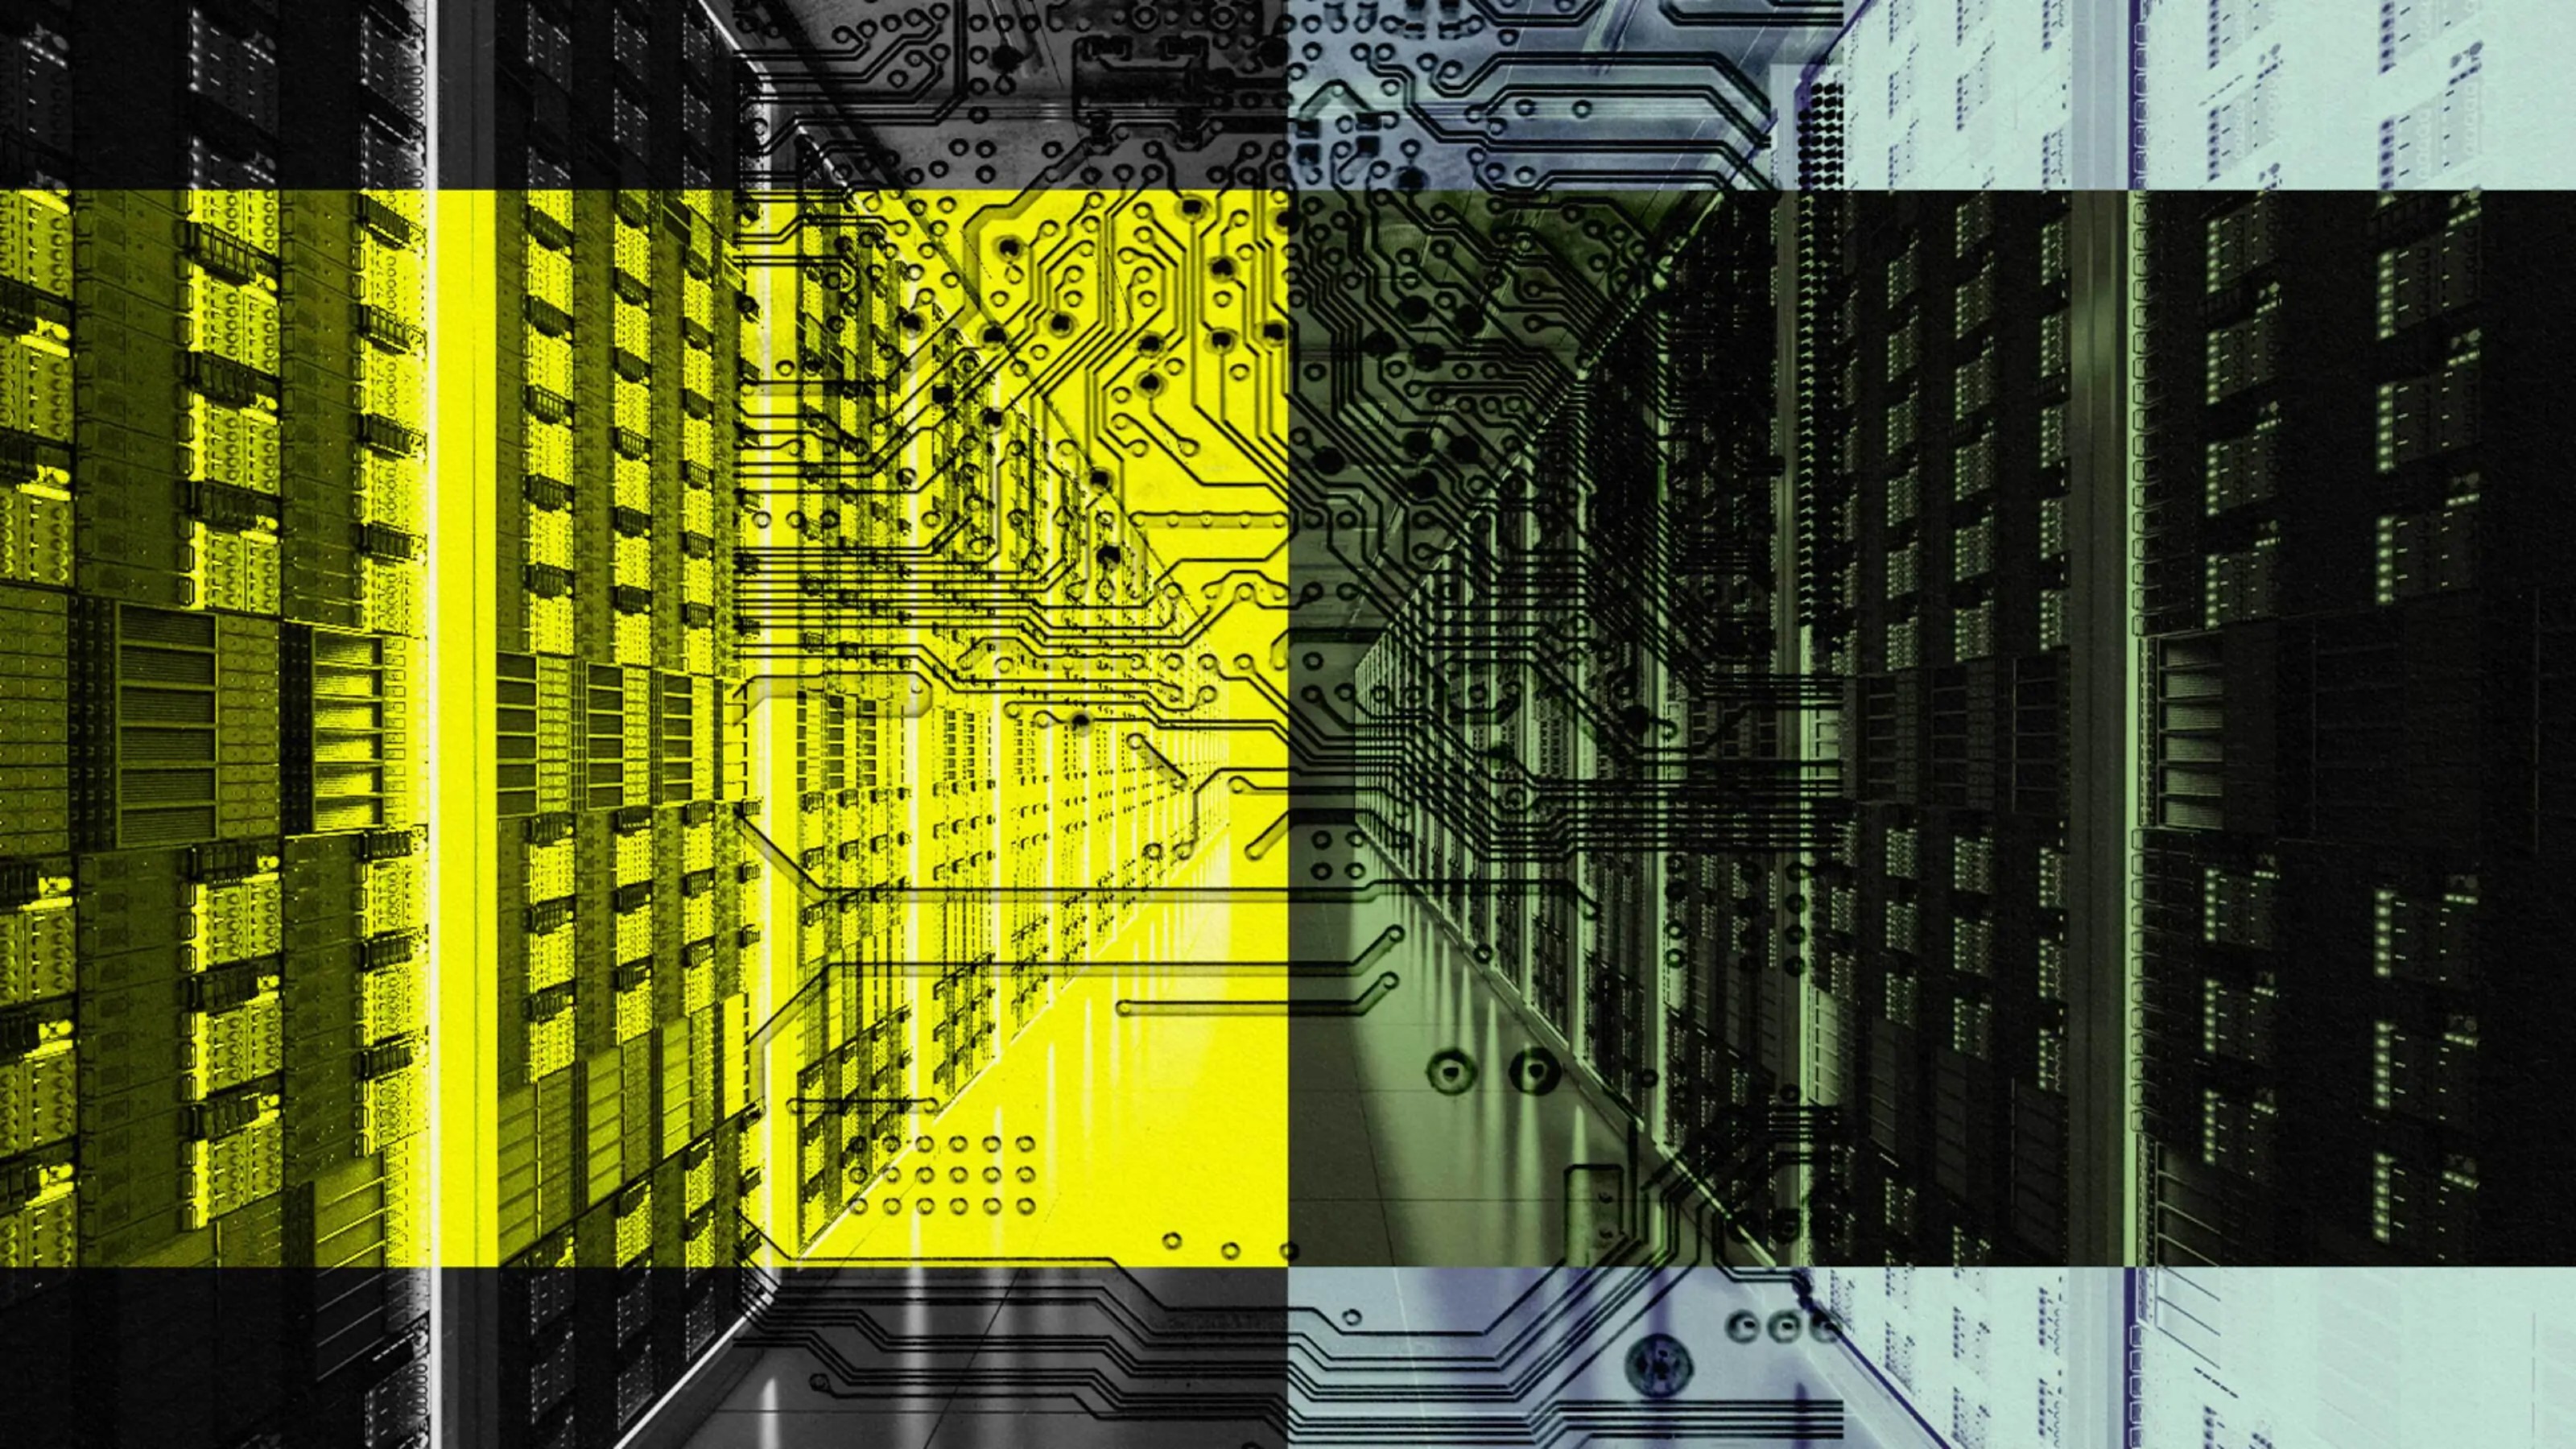 A digital artwork combining elements of a cityscape, printed circuit boards, and binary code, rendered in yellow and black tones.